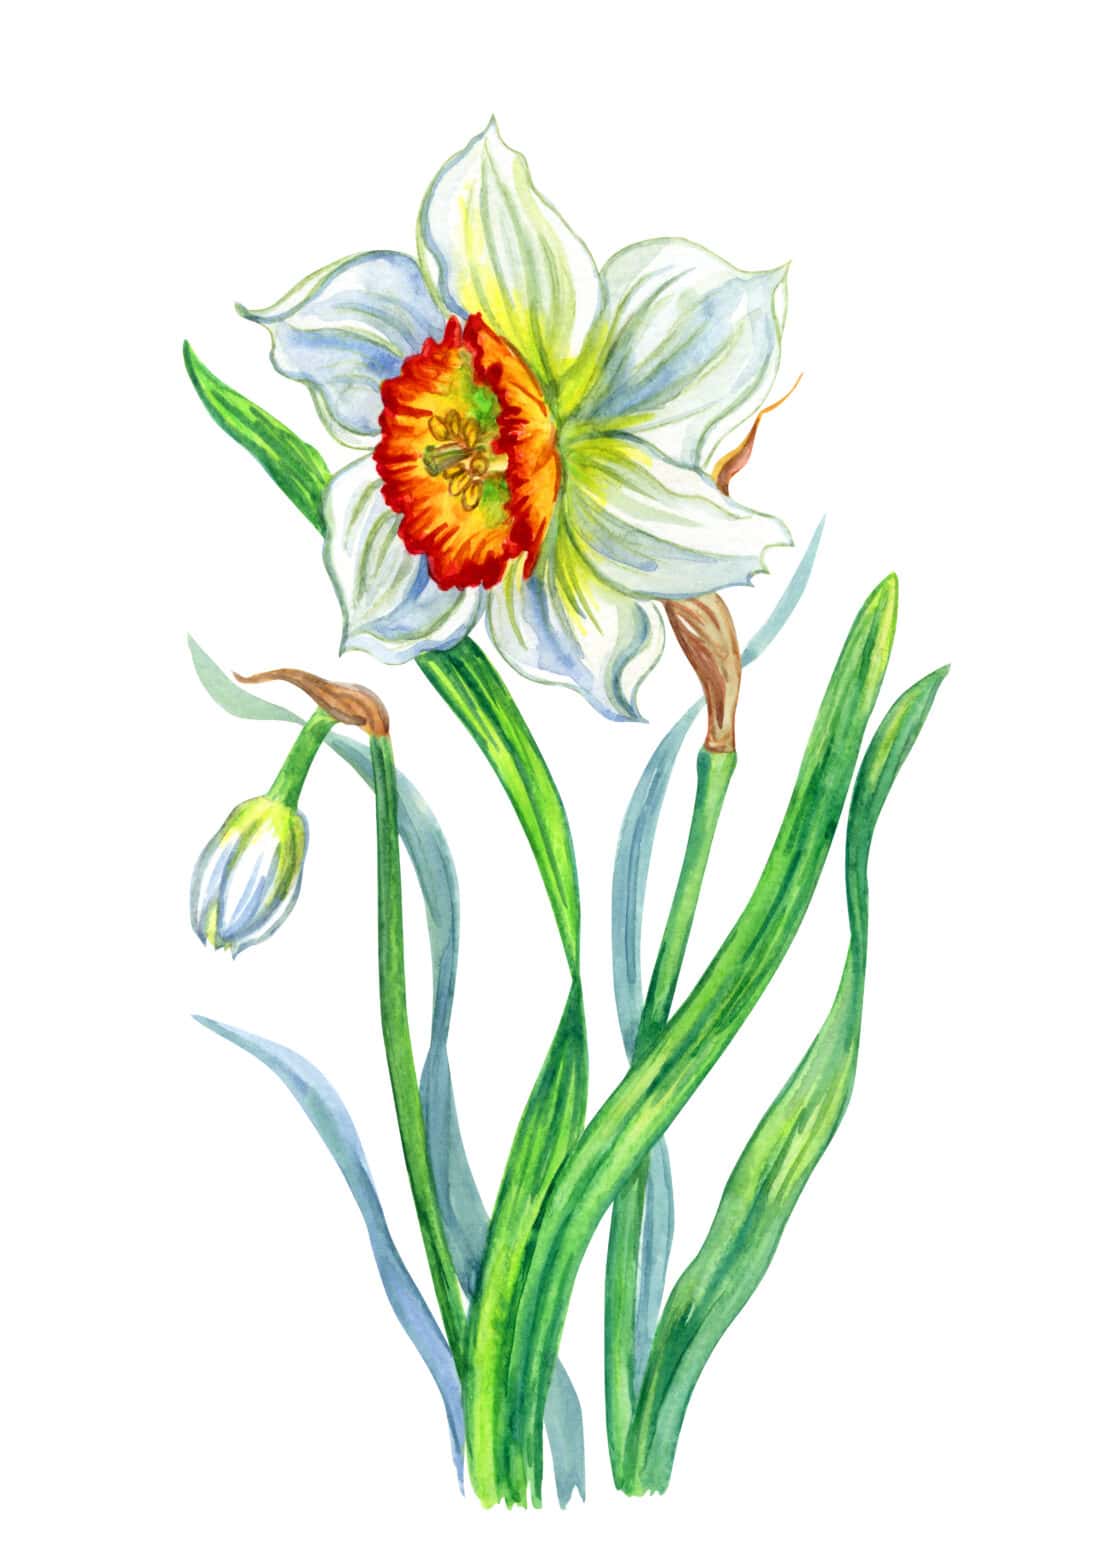 Watercolor illustration of a white daffodil with a vibrant orange center, surrounded by green leaves and a bud.